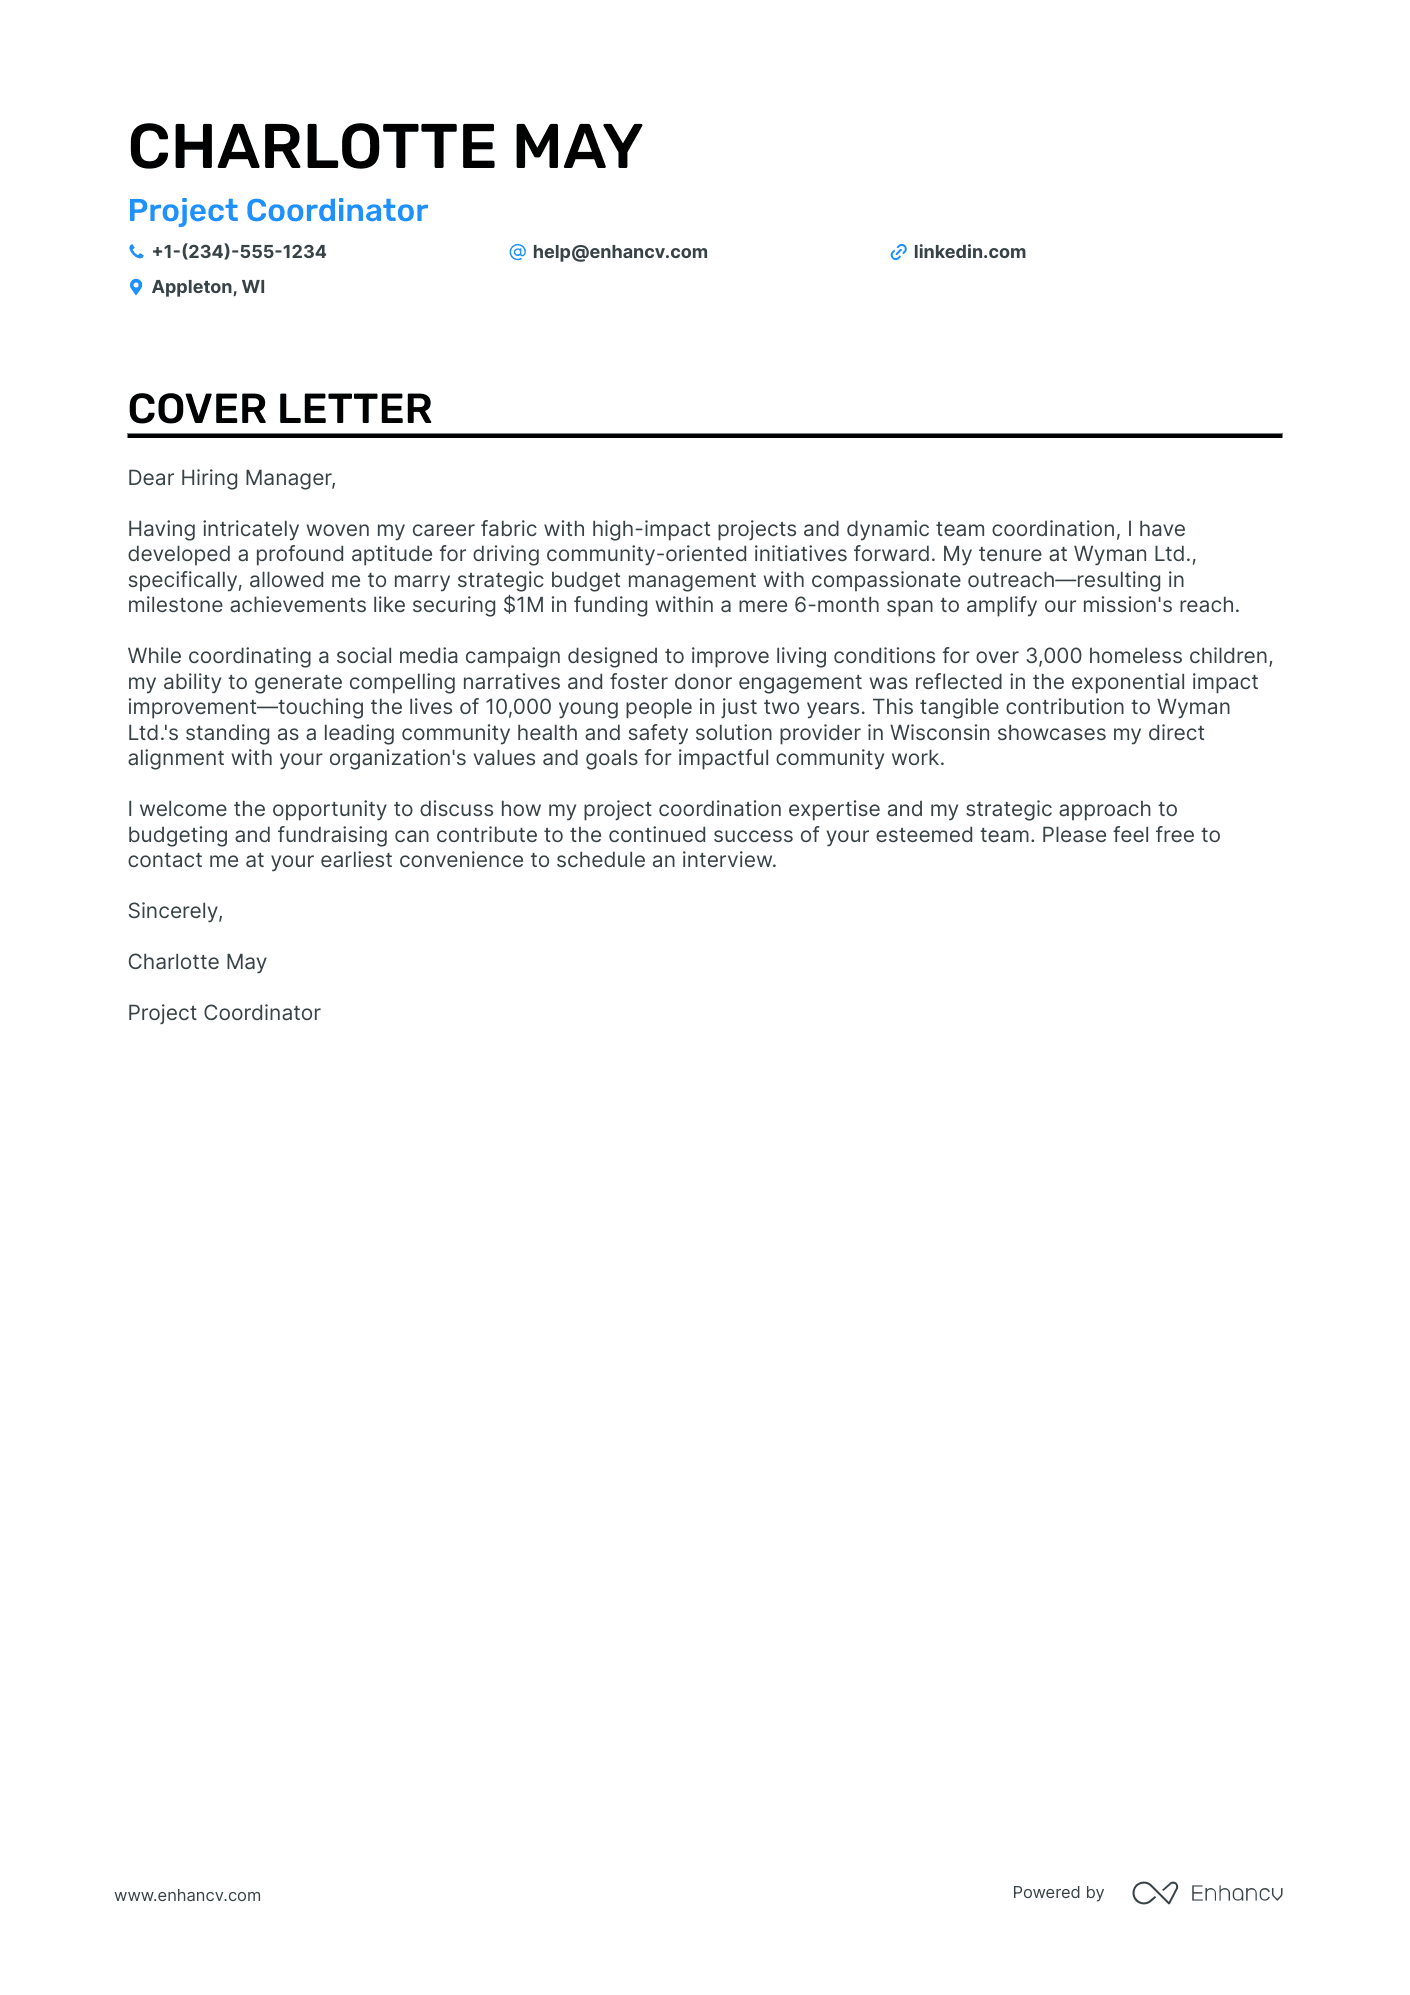 Project Coordinator cover letter